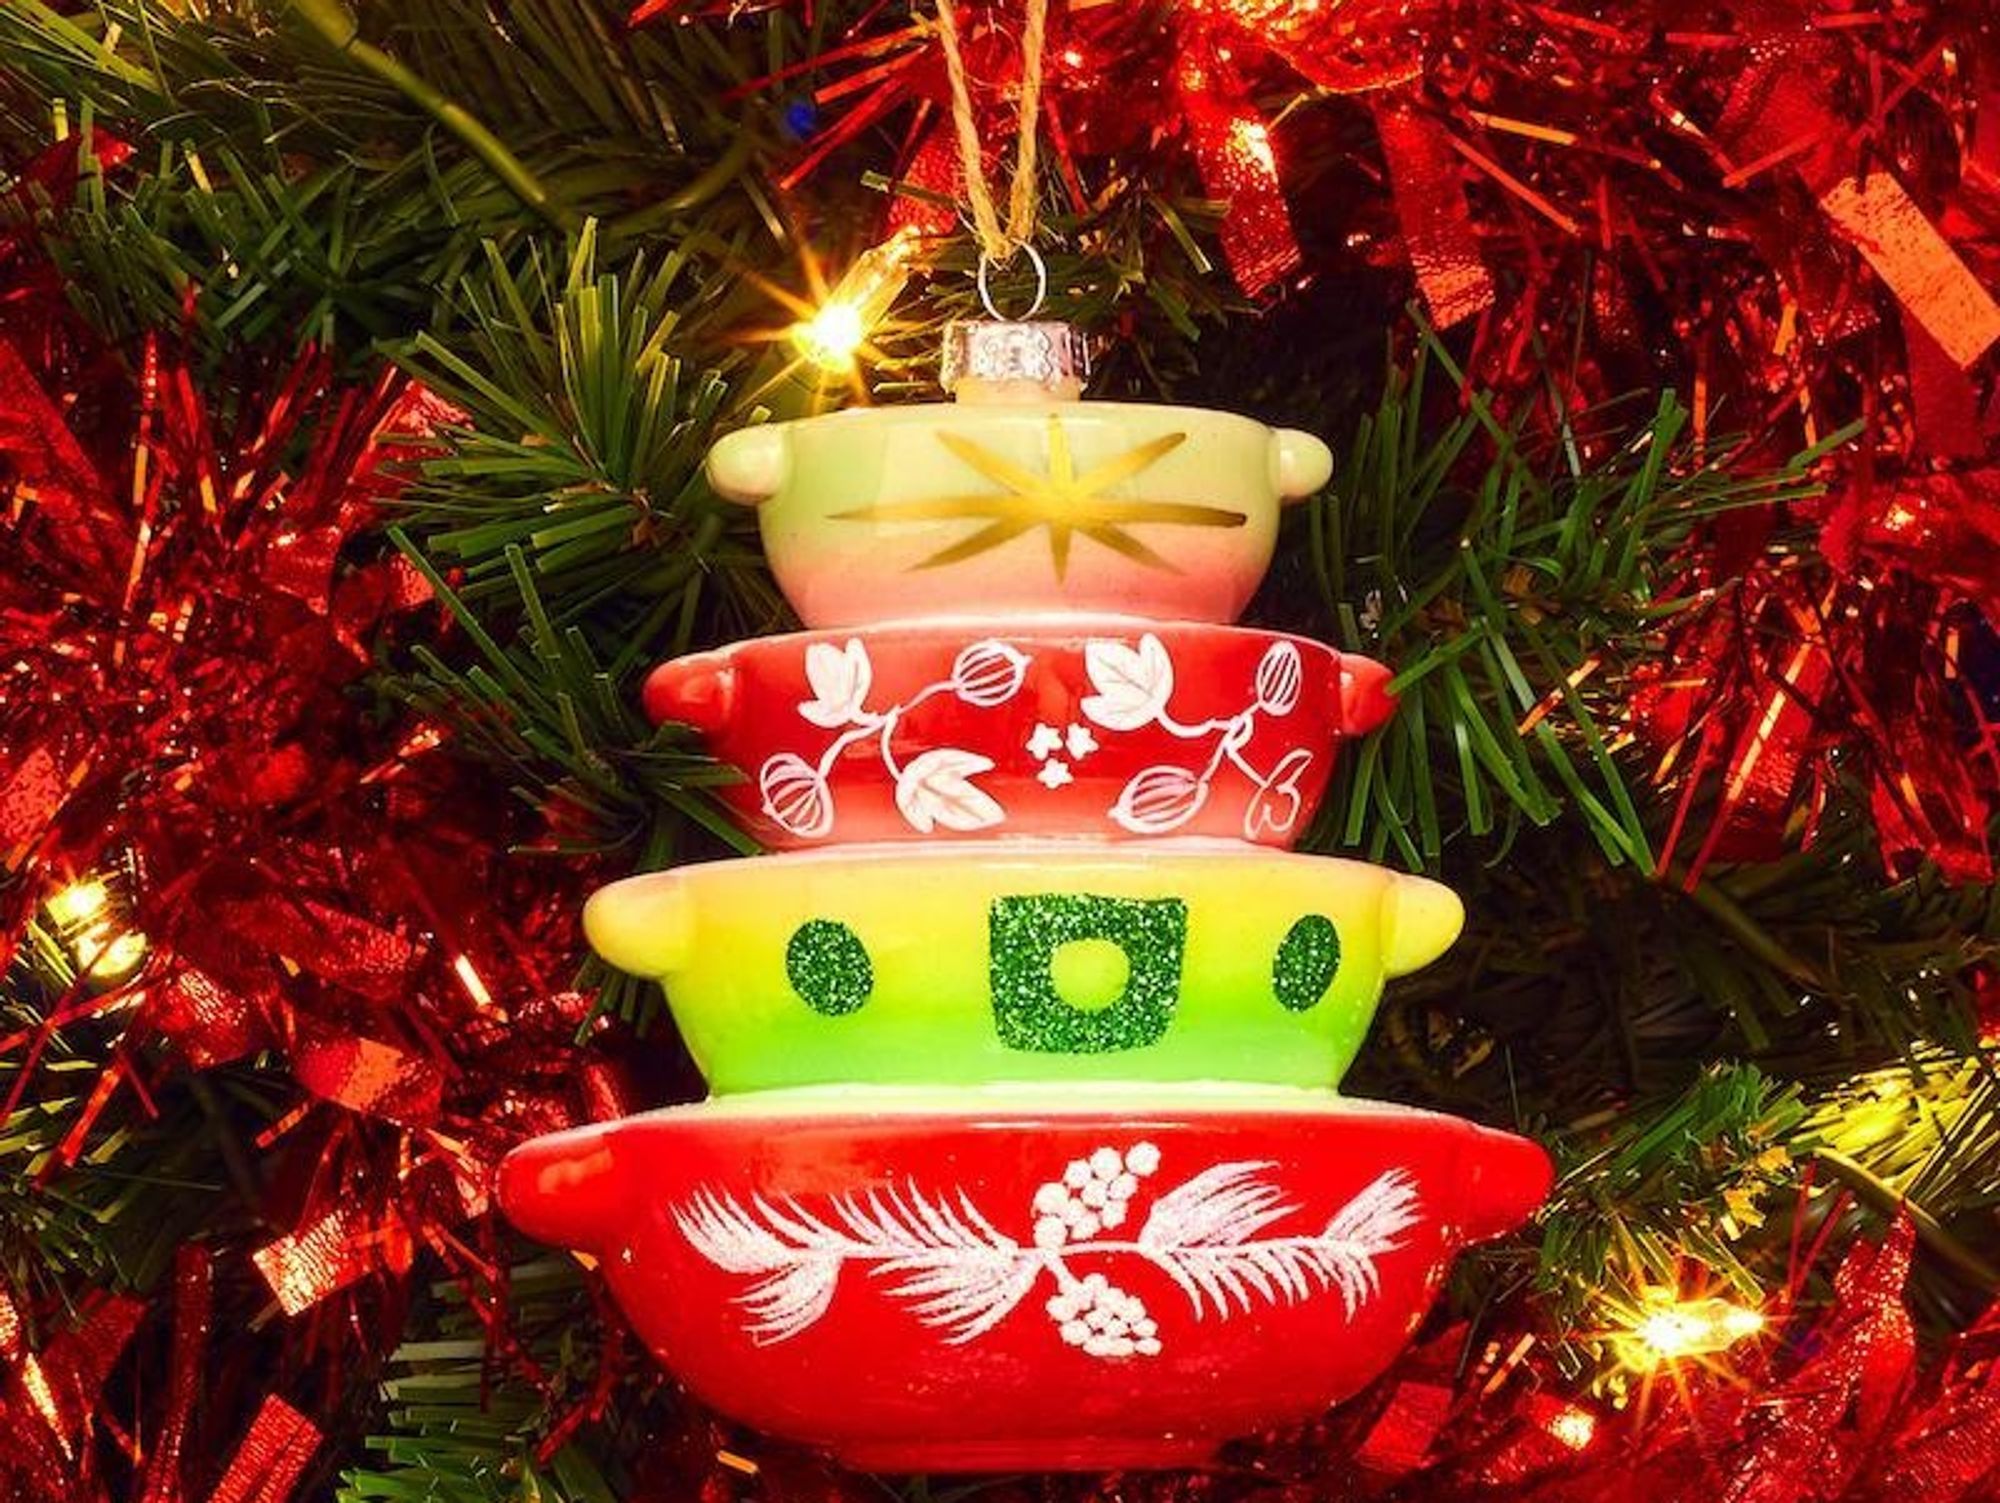 Bakeware Christmas Tree Collection